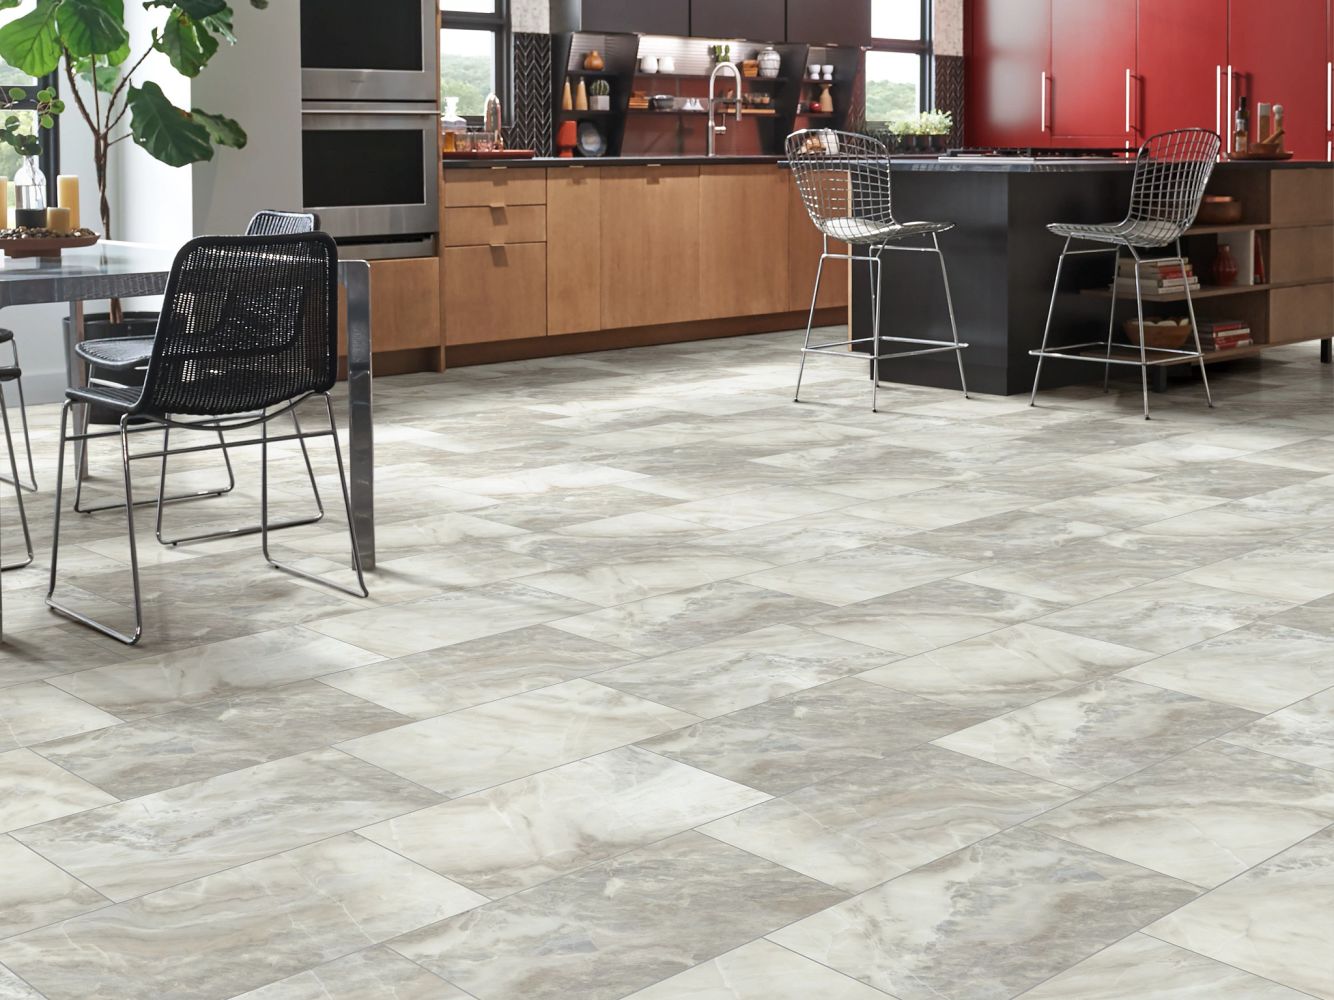 Shaw Floors Resilient Property Solutions Urban Organics White Onyx 01101_VE280